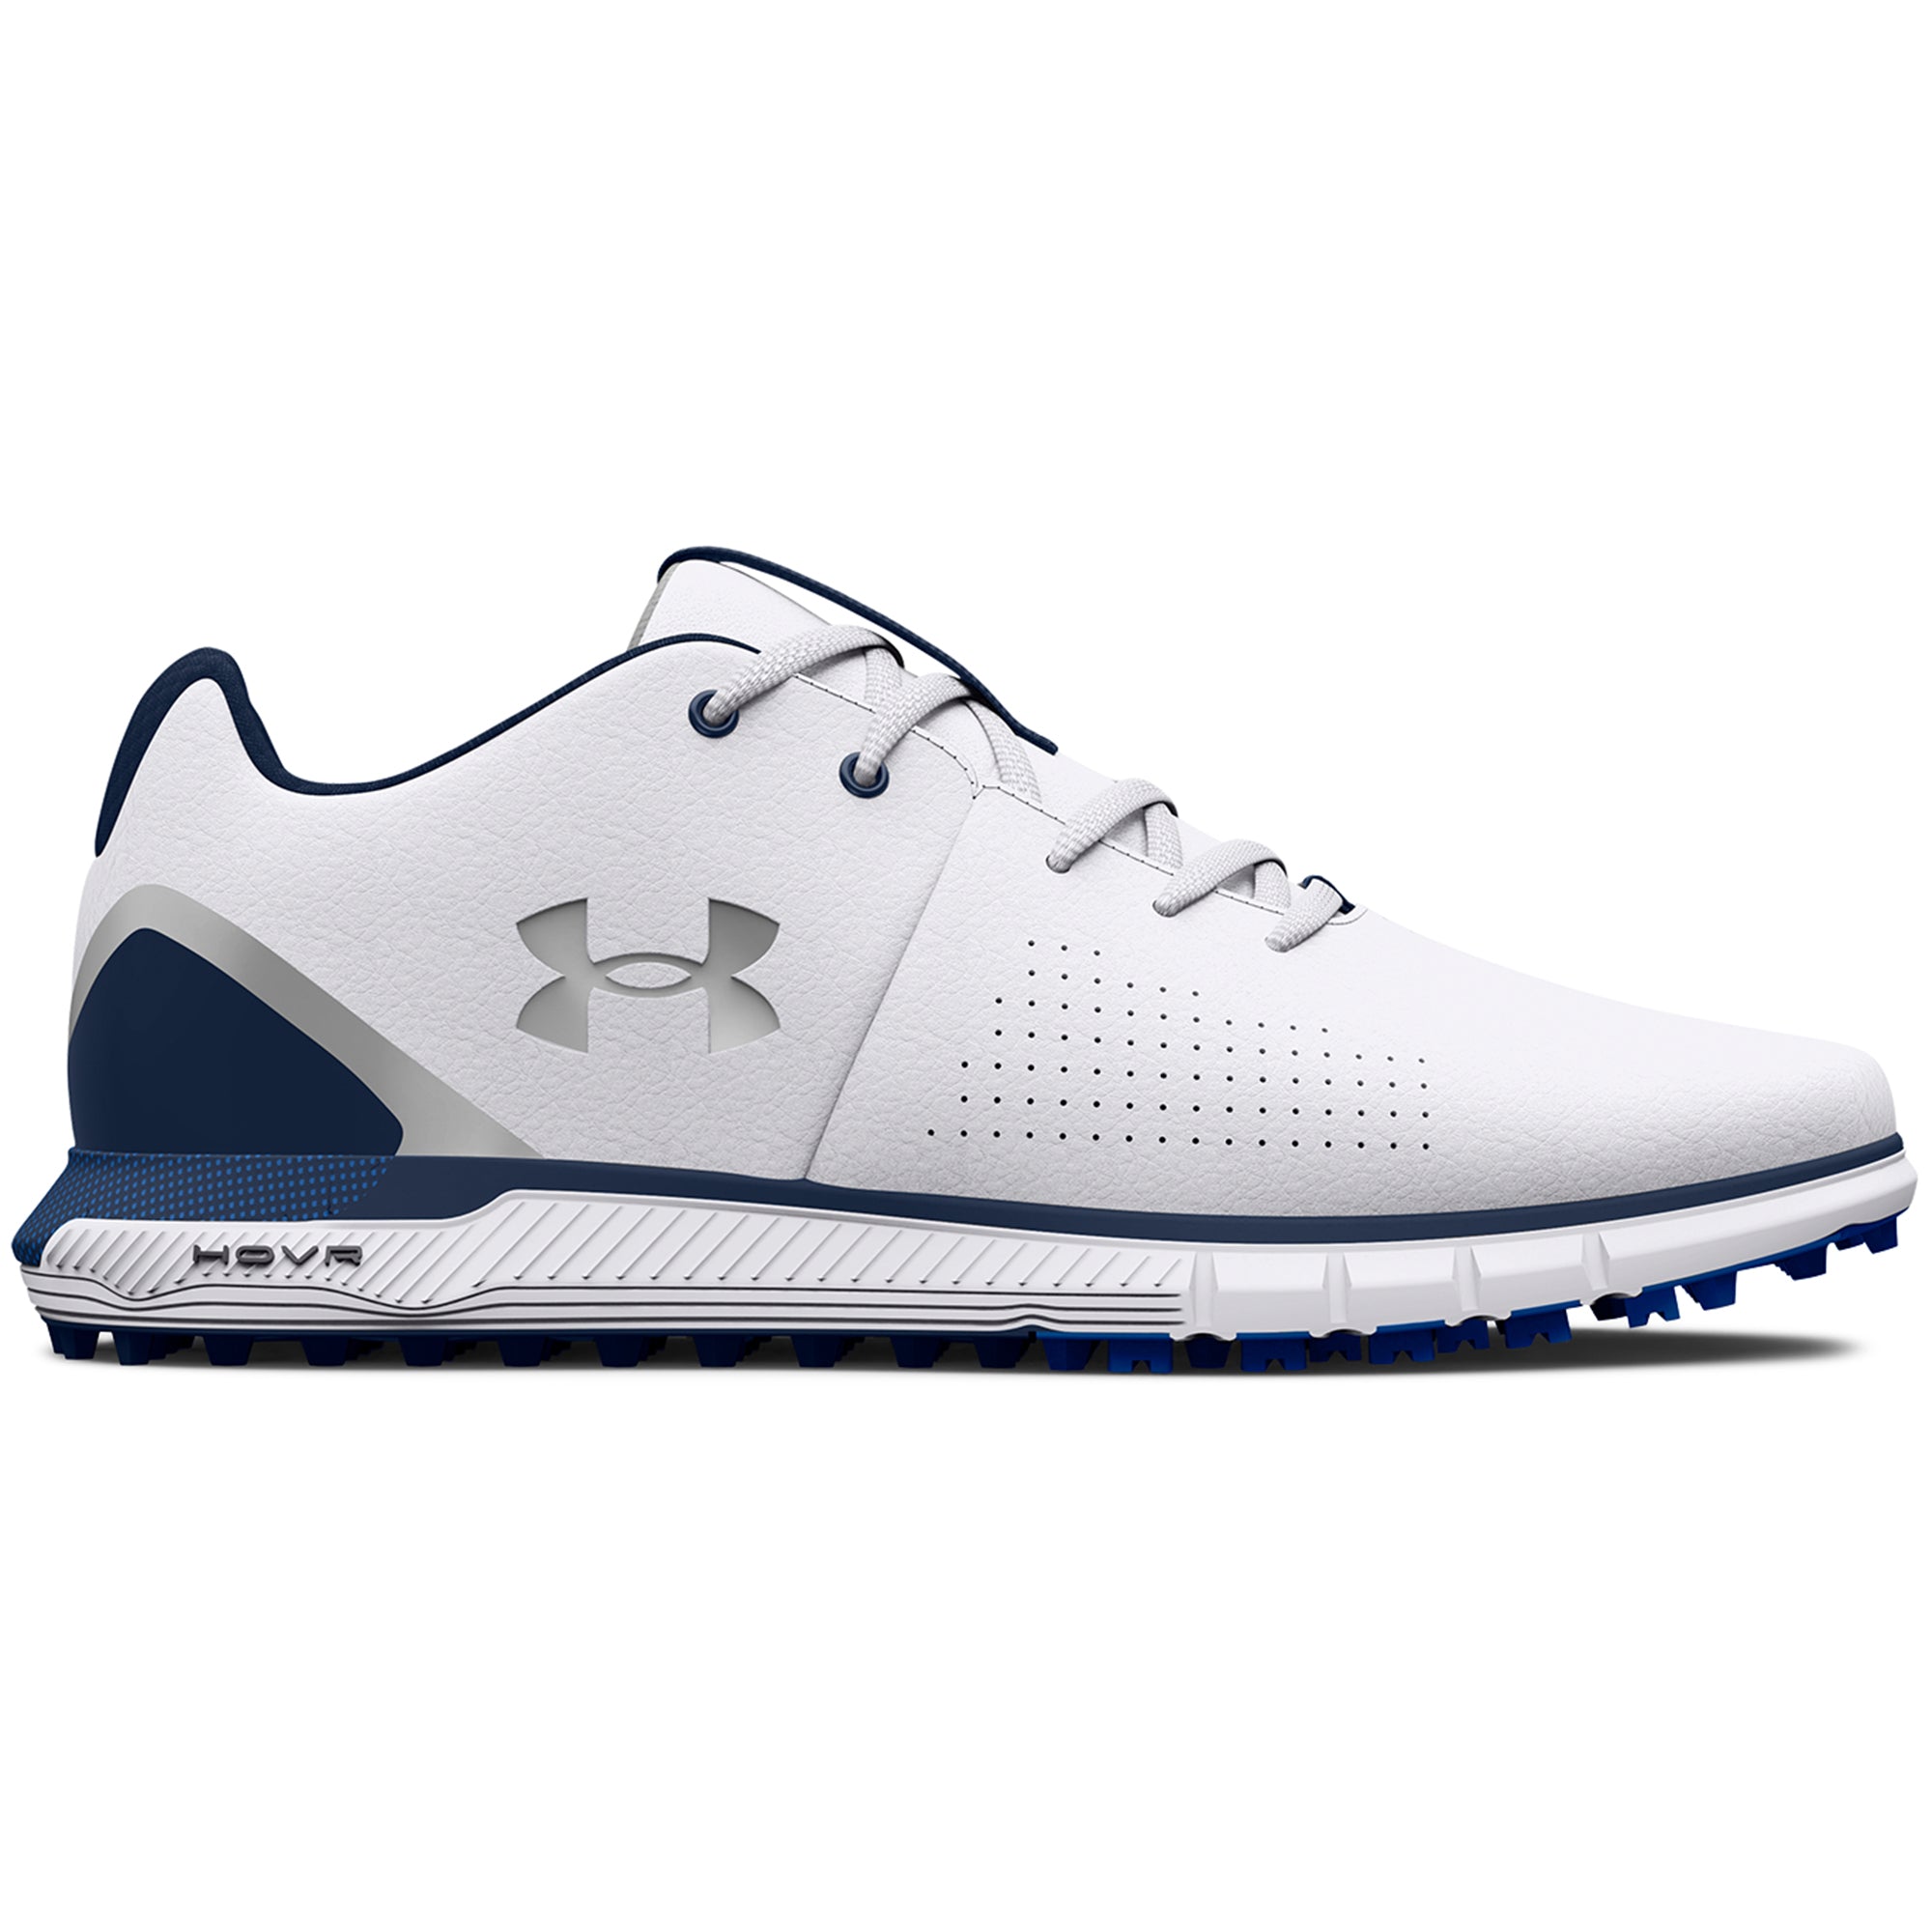 Under Armour HOVR Fade SL 2 E Golf Shoes 3026970 White Academy 101 Function18